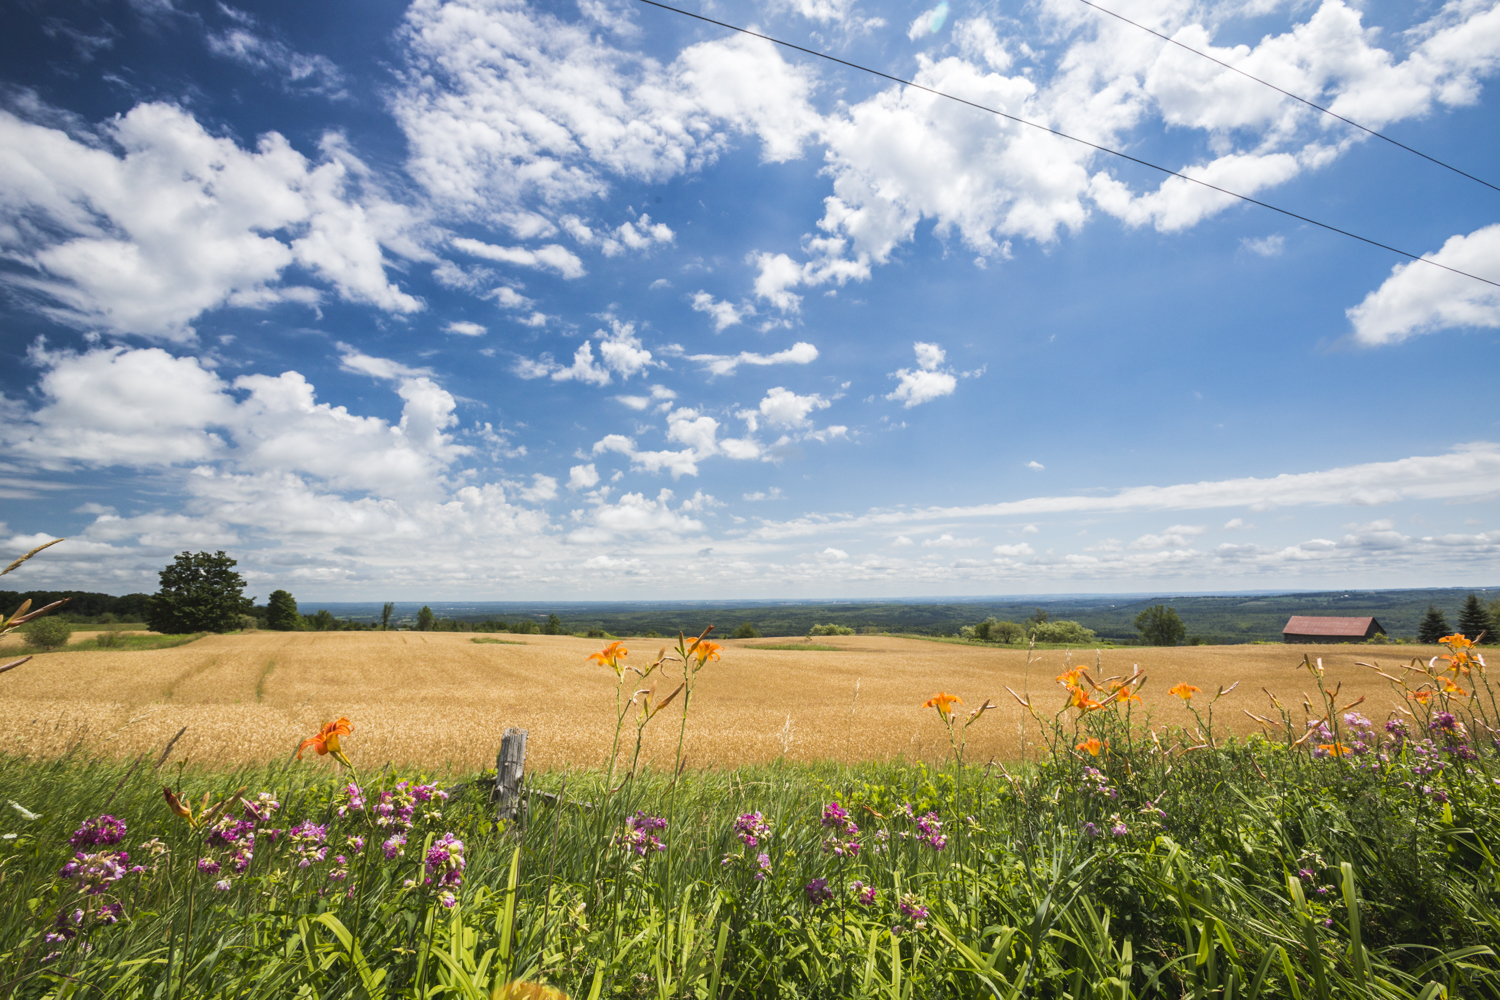 An urban landscape in Dufferin County showing wheat fields with wildflowers growing on the perimeter, and a blue sky with clouds